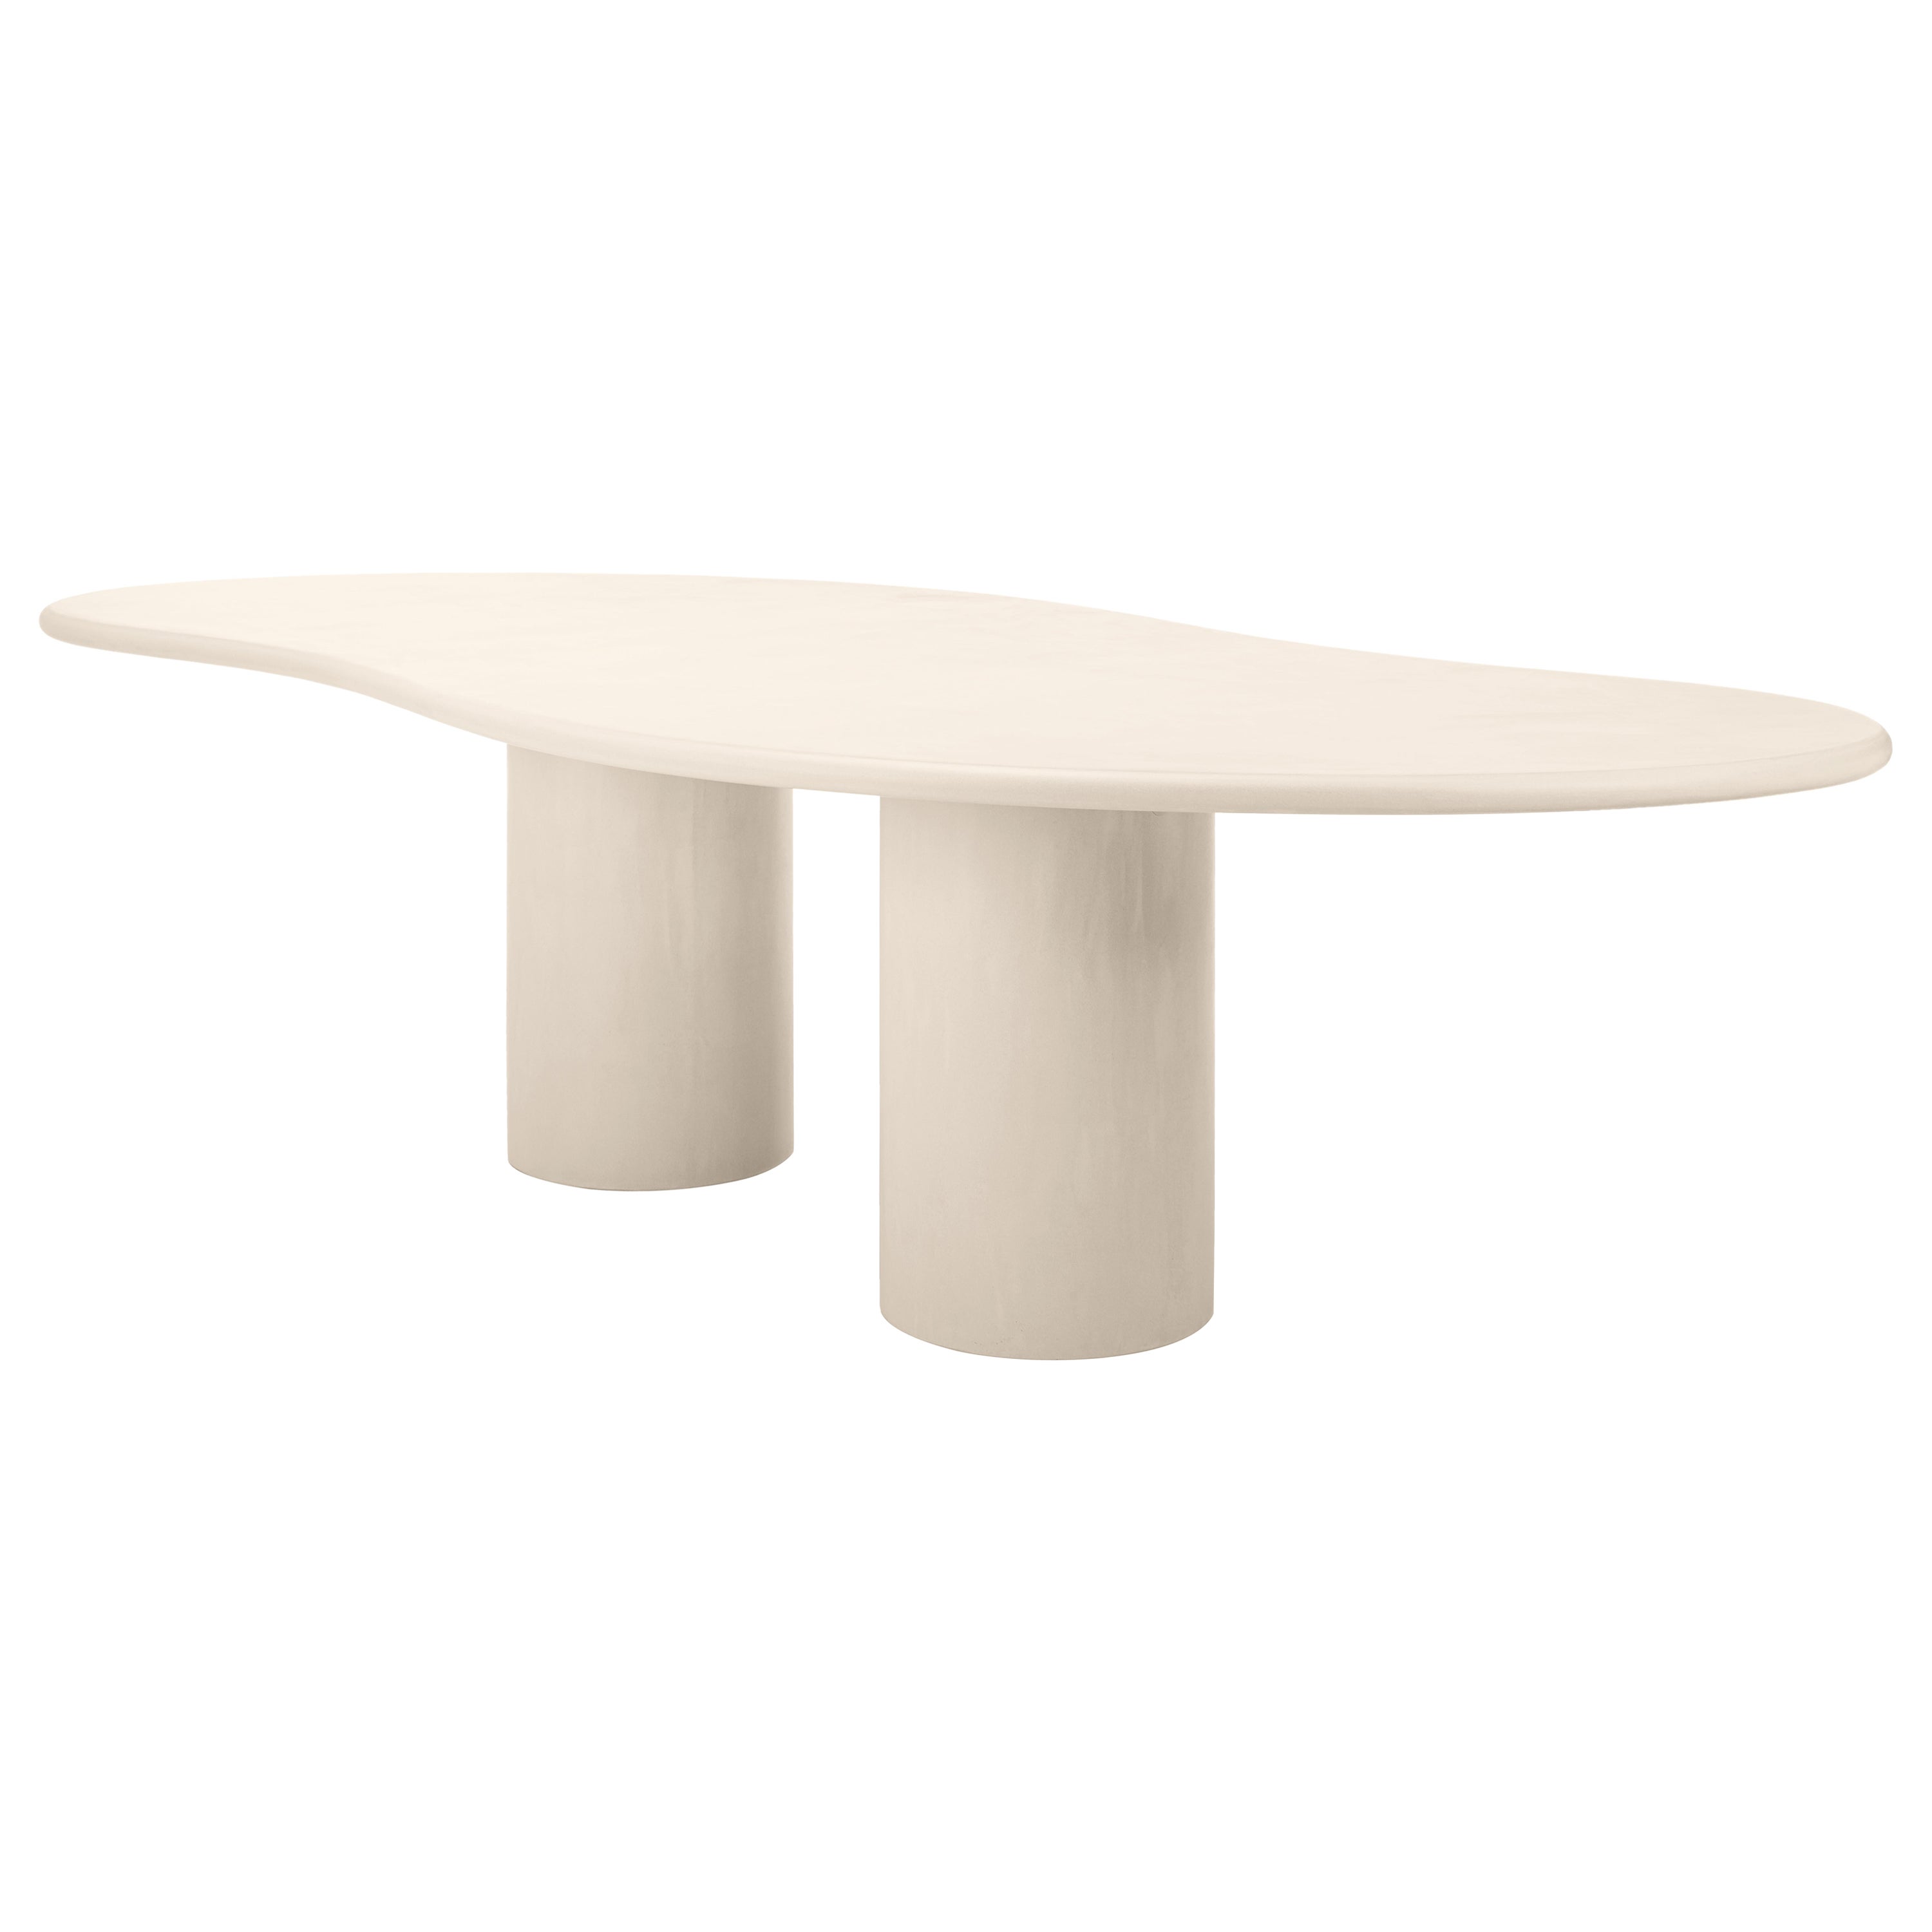 Natural Plaster Dining Table "Latus" 260 by Isabelle Beaumont For Sale